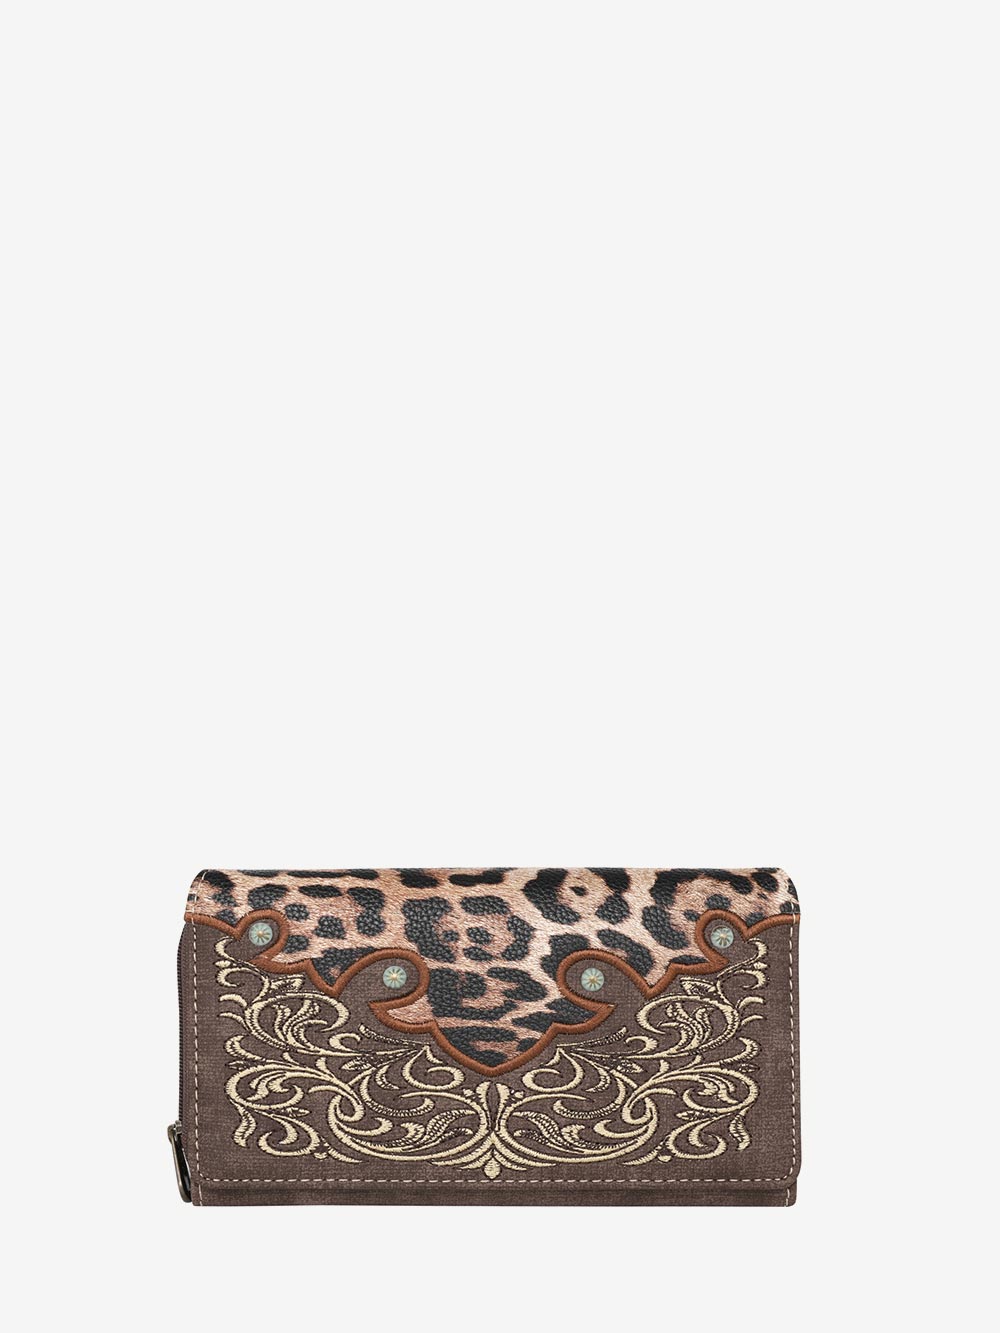 Montana West Embroidered Floral Leopard Wallet - Montana West World